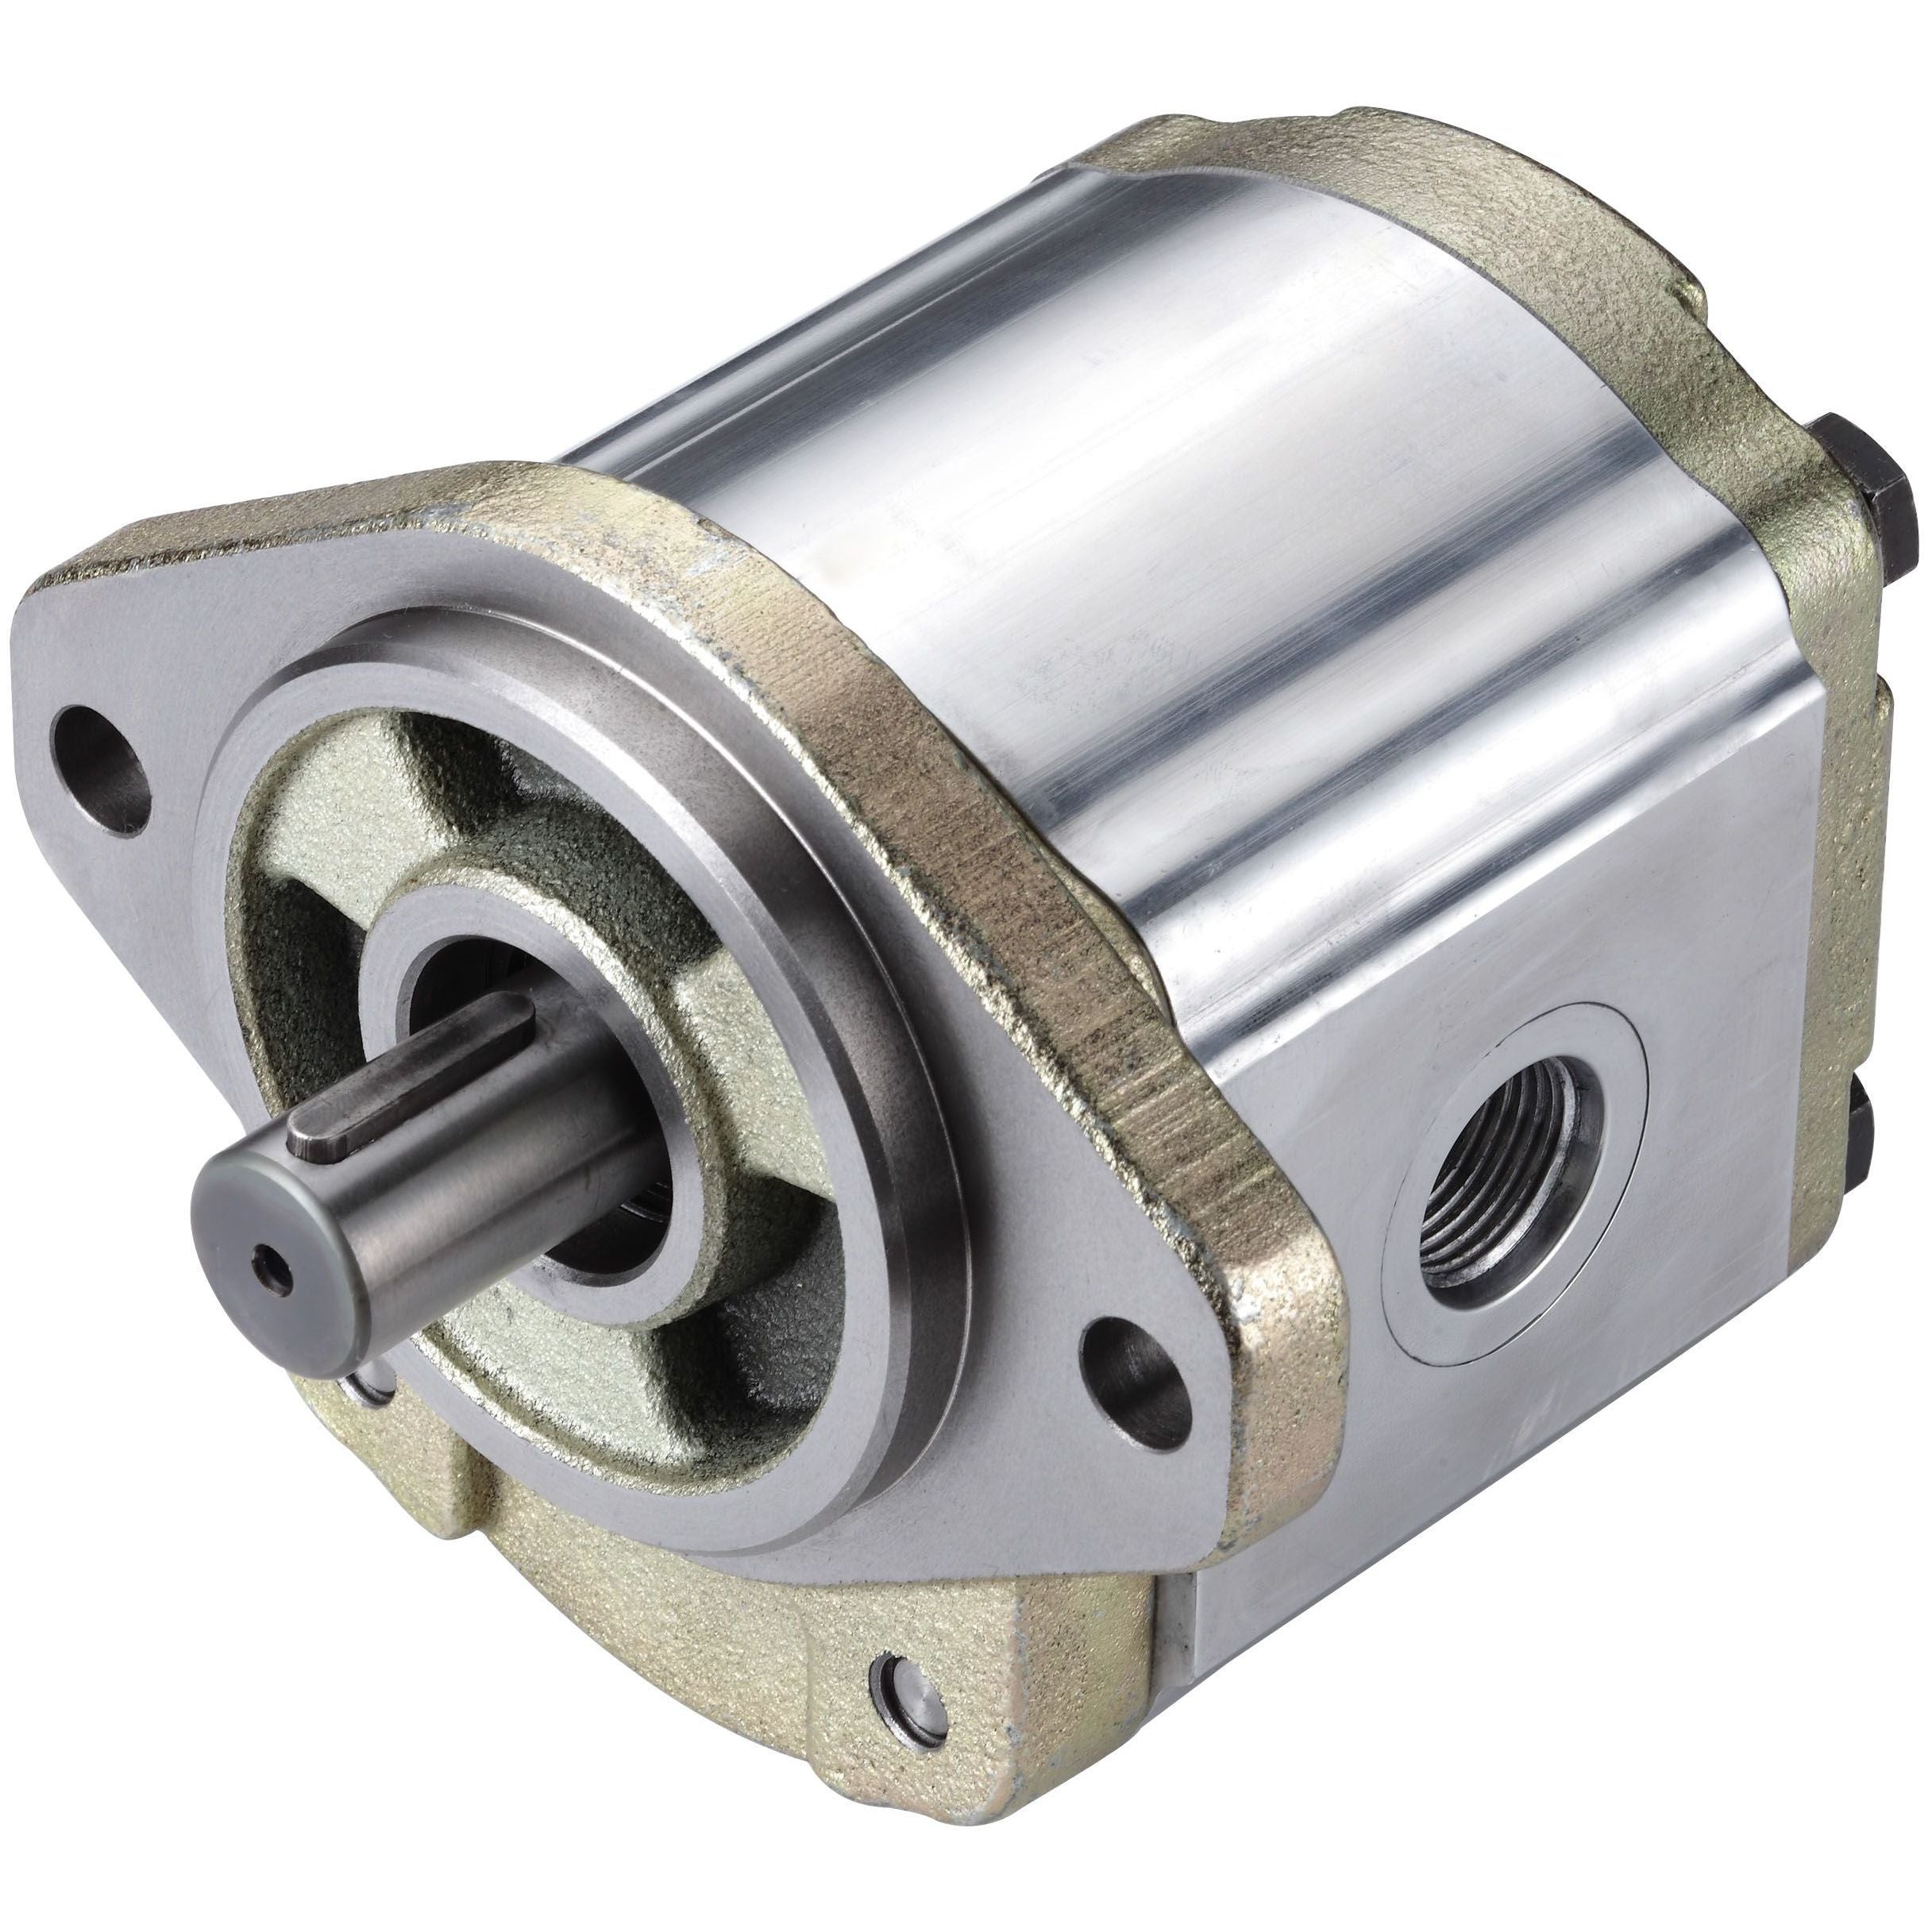 3GA5U125R : Honor Gear Pump, CW Rotation, 25cc (1.53in3), 11.89 GPM, 3500psi, 3000 RPM, #16 SAE (1") In, #12 SAE (3/4") Out, Splined Shaft 11-Tooth, 16/32 Pitch, SAE A 2-Bolt Mount